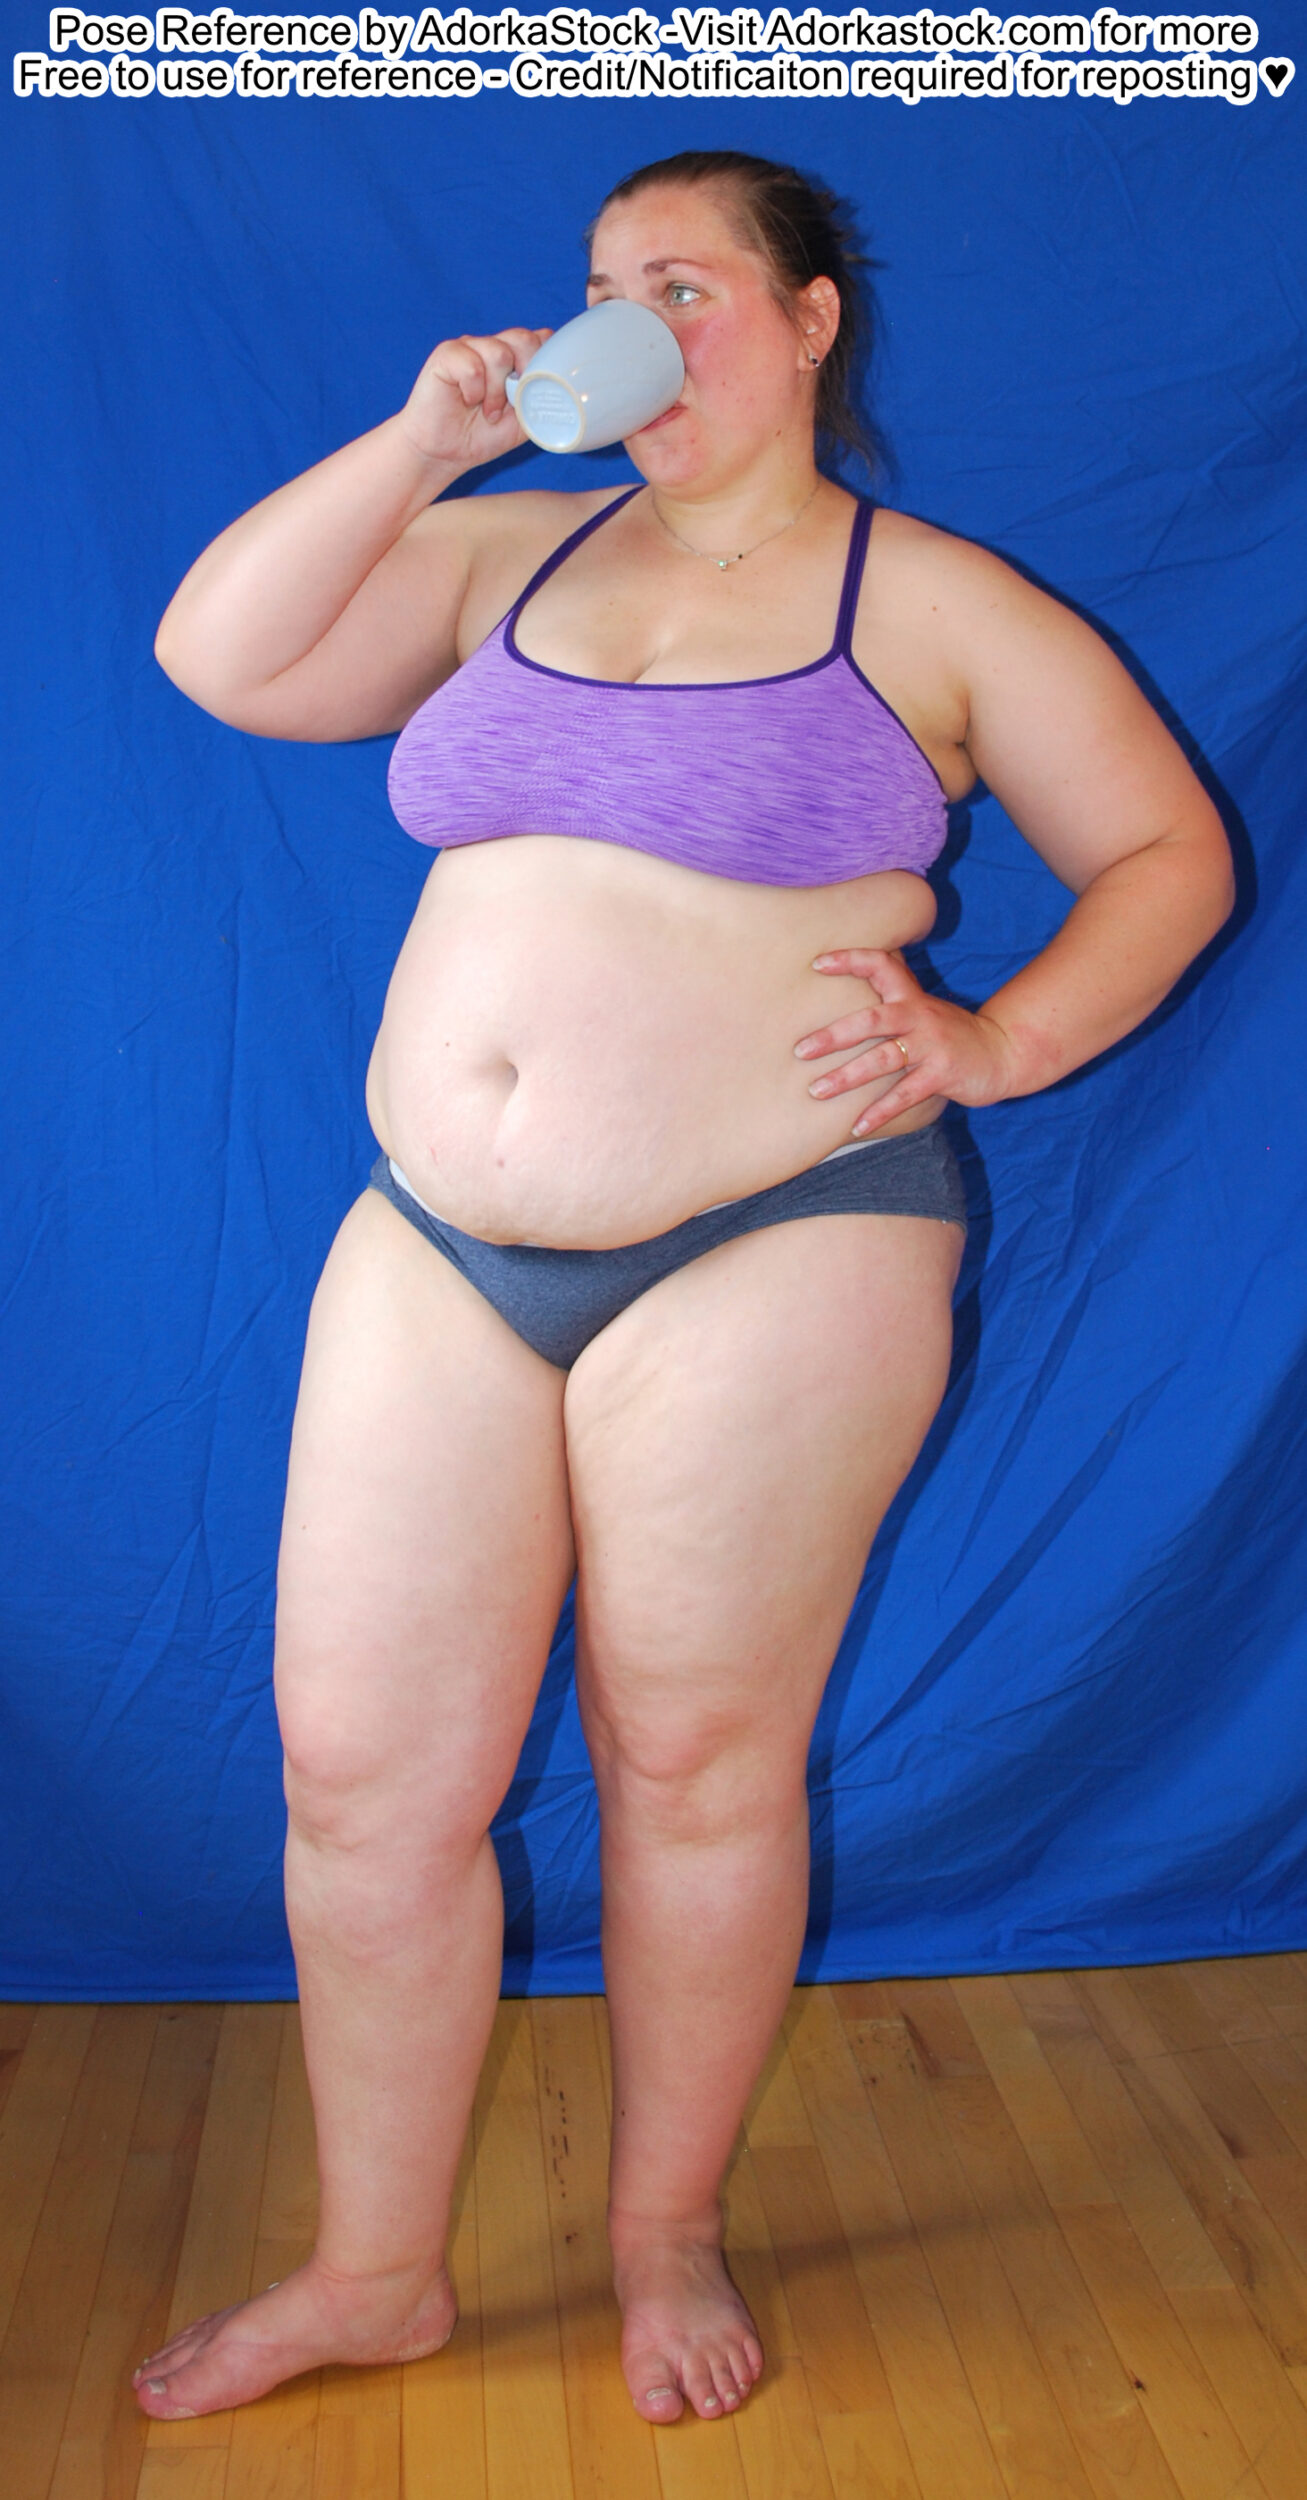 Fat, white, female pose reference model in standing casual pose with a mug to her lips, hand on her hip.